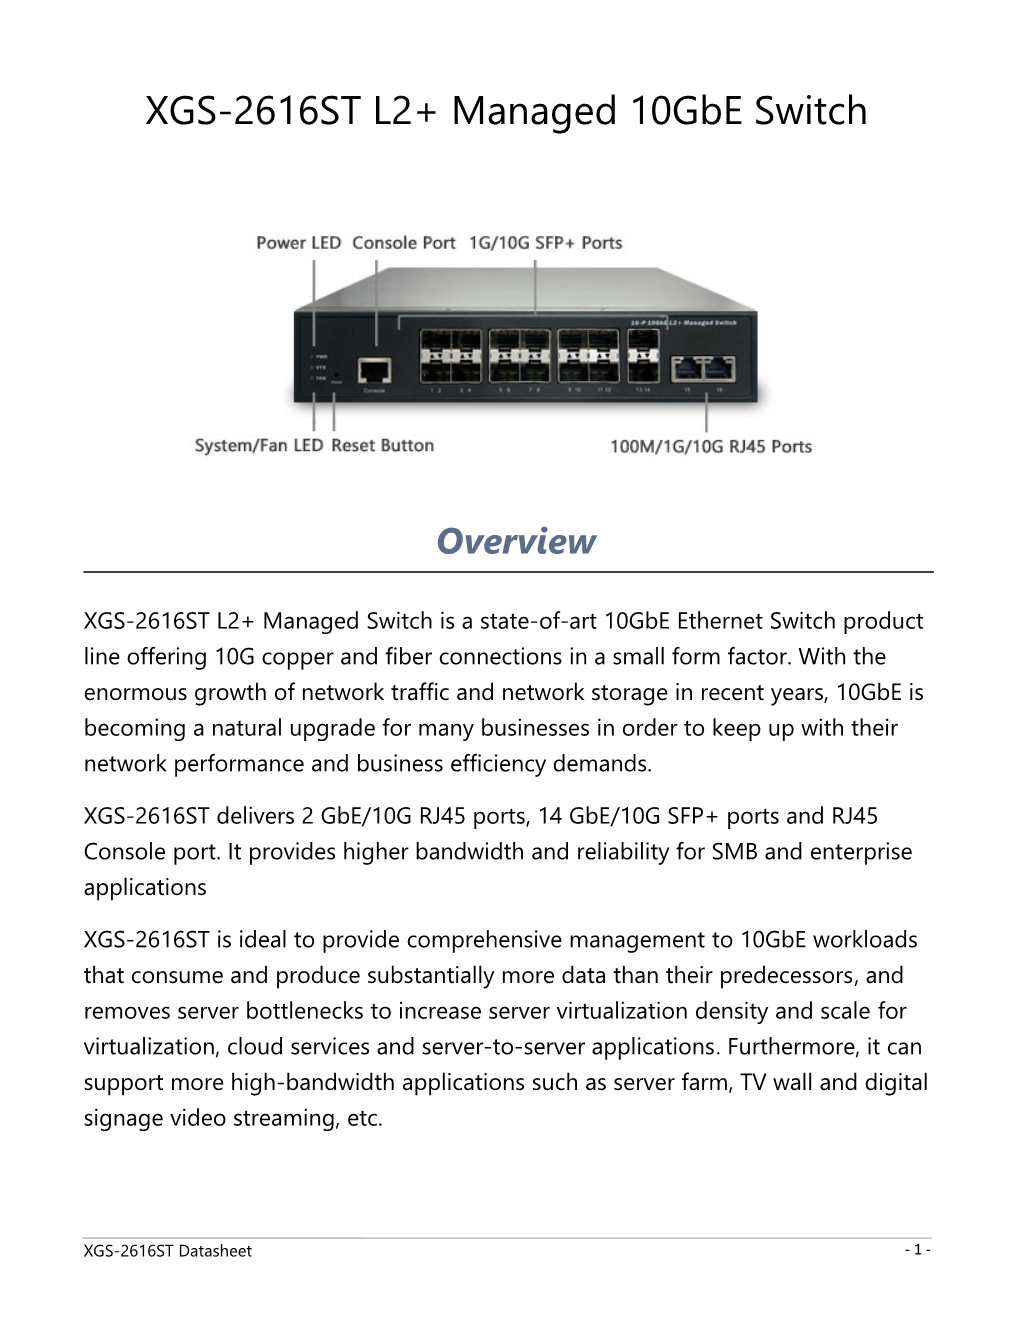 XGS-2616ST L2+ Managed 10Gbe Switch